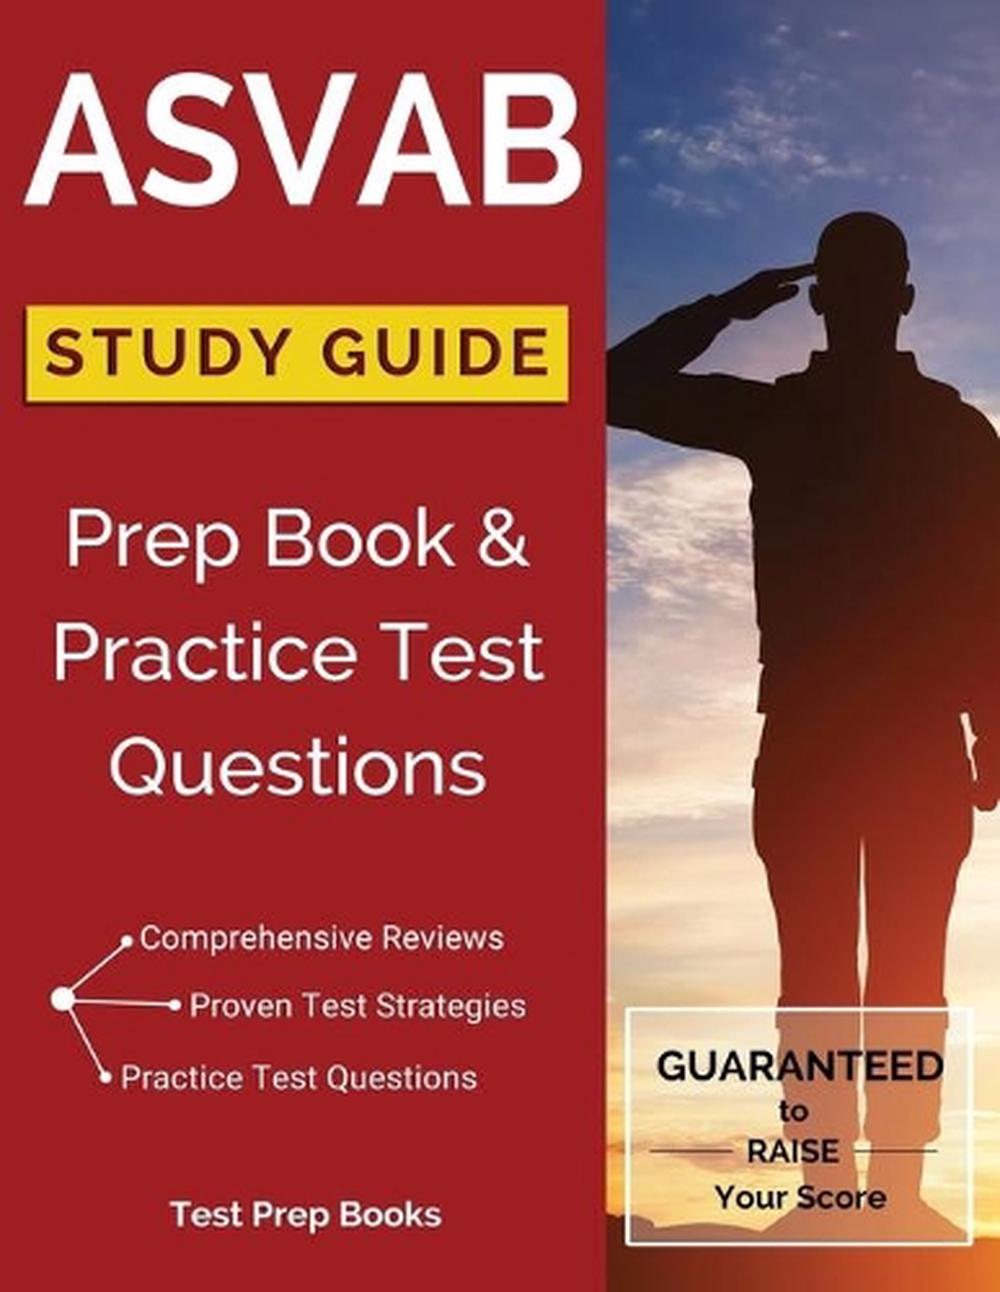 Asvab Study Guide Prep Book & Practice Test Questions by Asvab Test